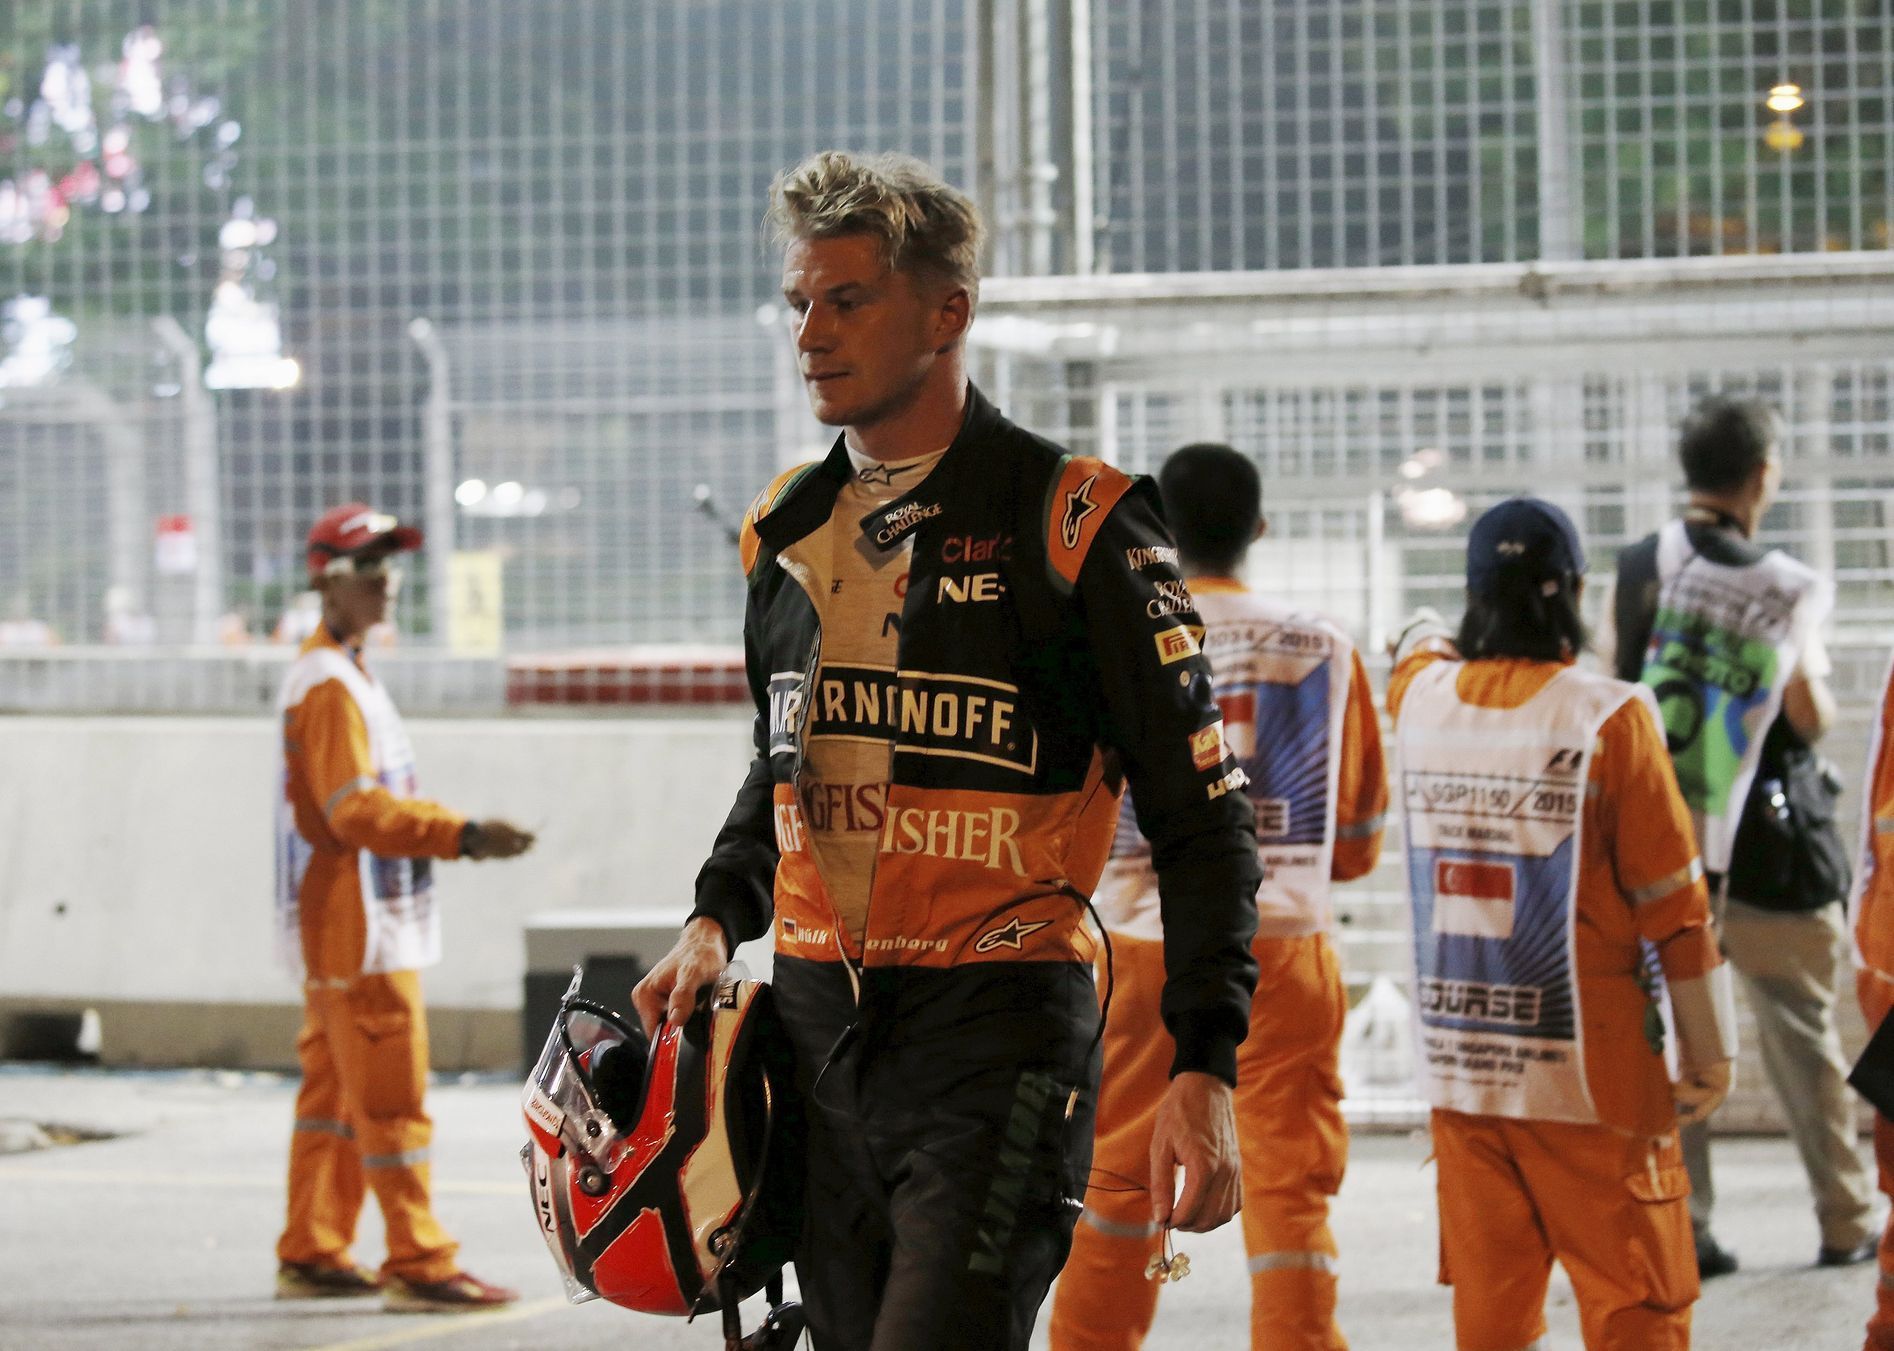 Force India Formula One driver Hulkenberg of Germany walks from the track after crashing during the Singapore F1 Grand Prix